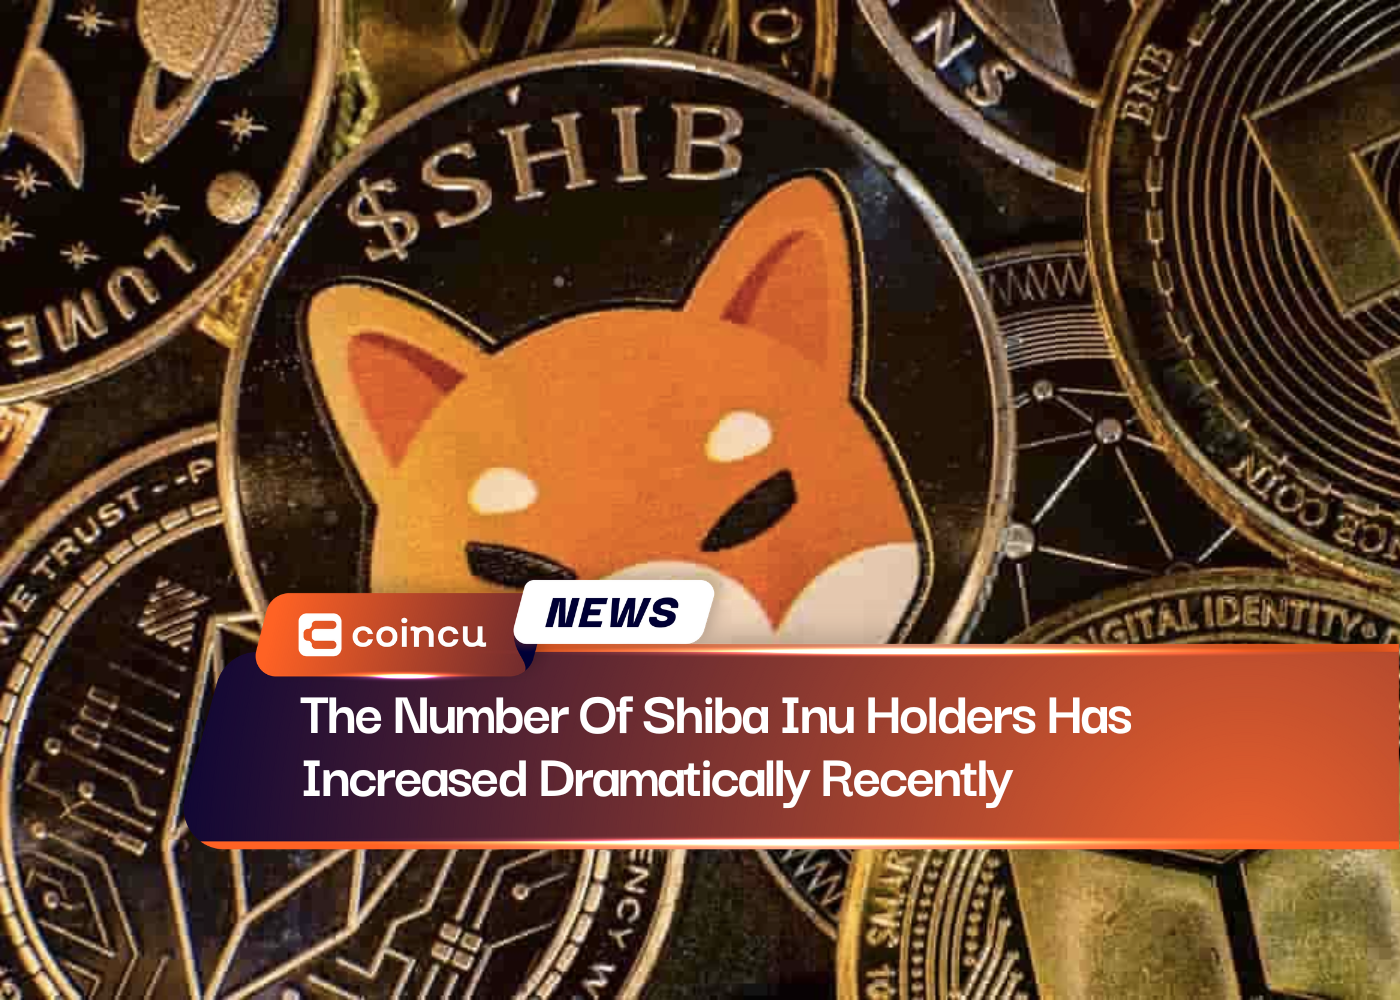 The Number Of Shiba Inu Holders Has Increased Dramatically Recently